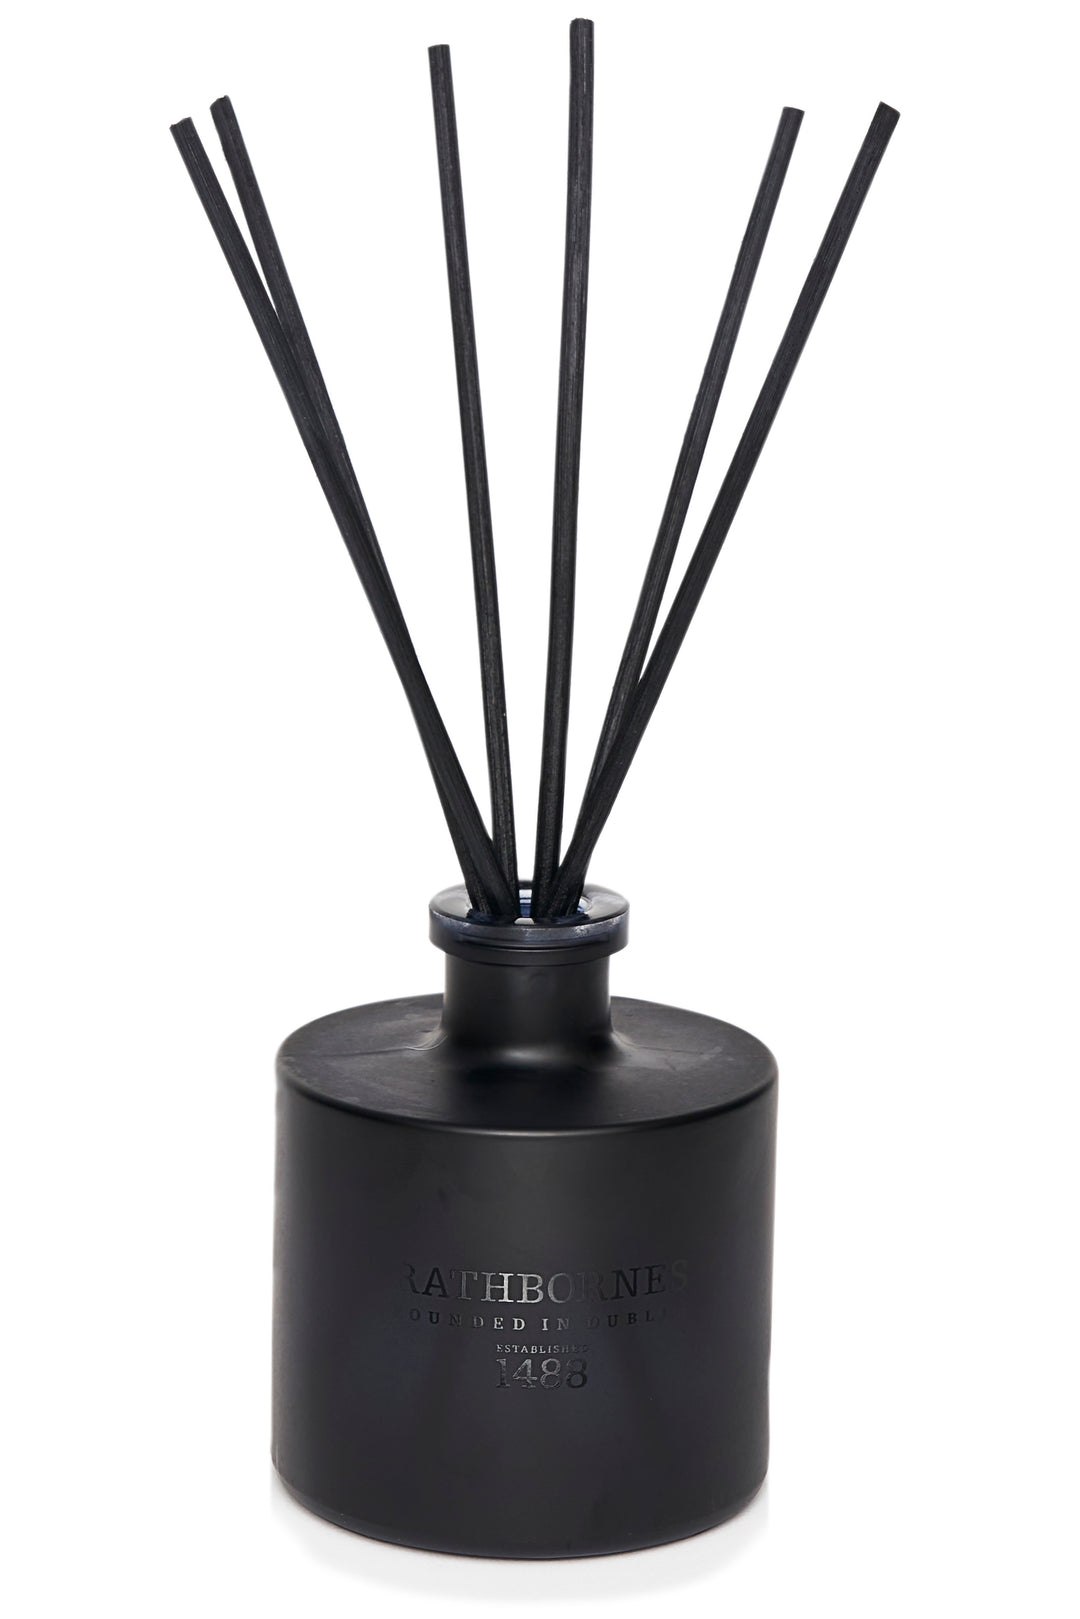 Dublin Dusk Scented Reed Diffuser (Smoked Oud & Ozonic Accords)